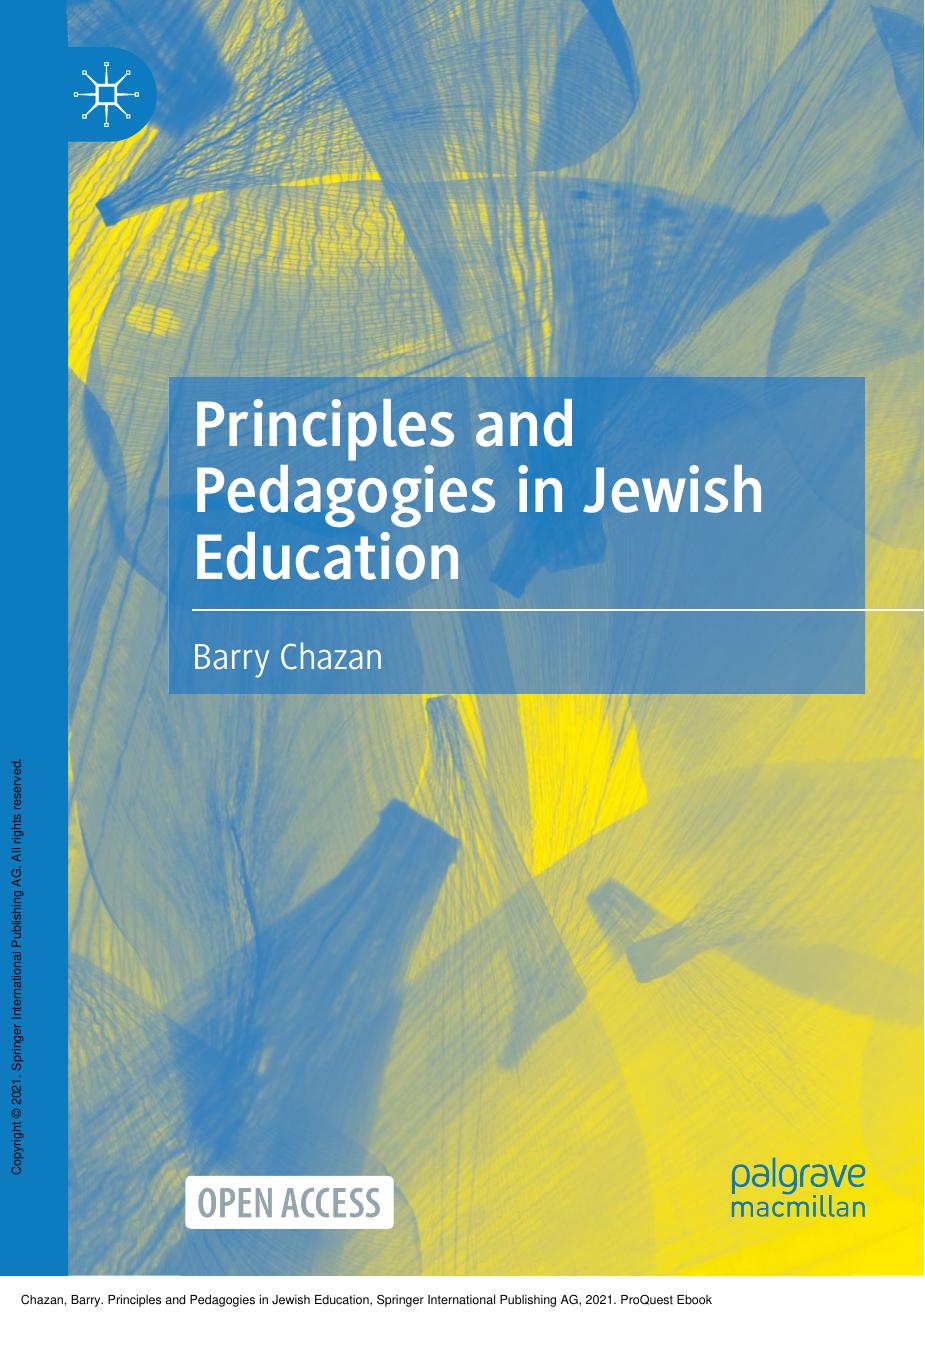 Principles and Pedagogies in Jewish Education by Barry Chazan